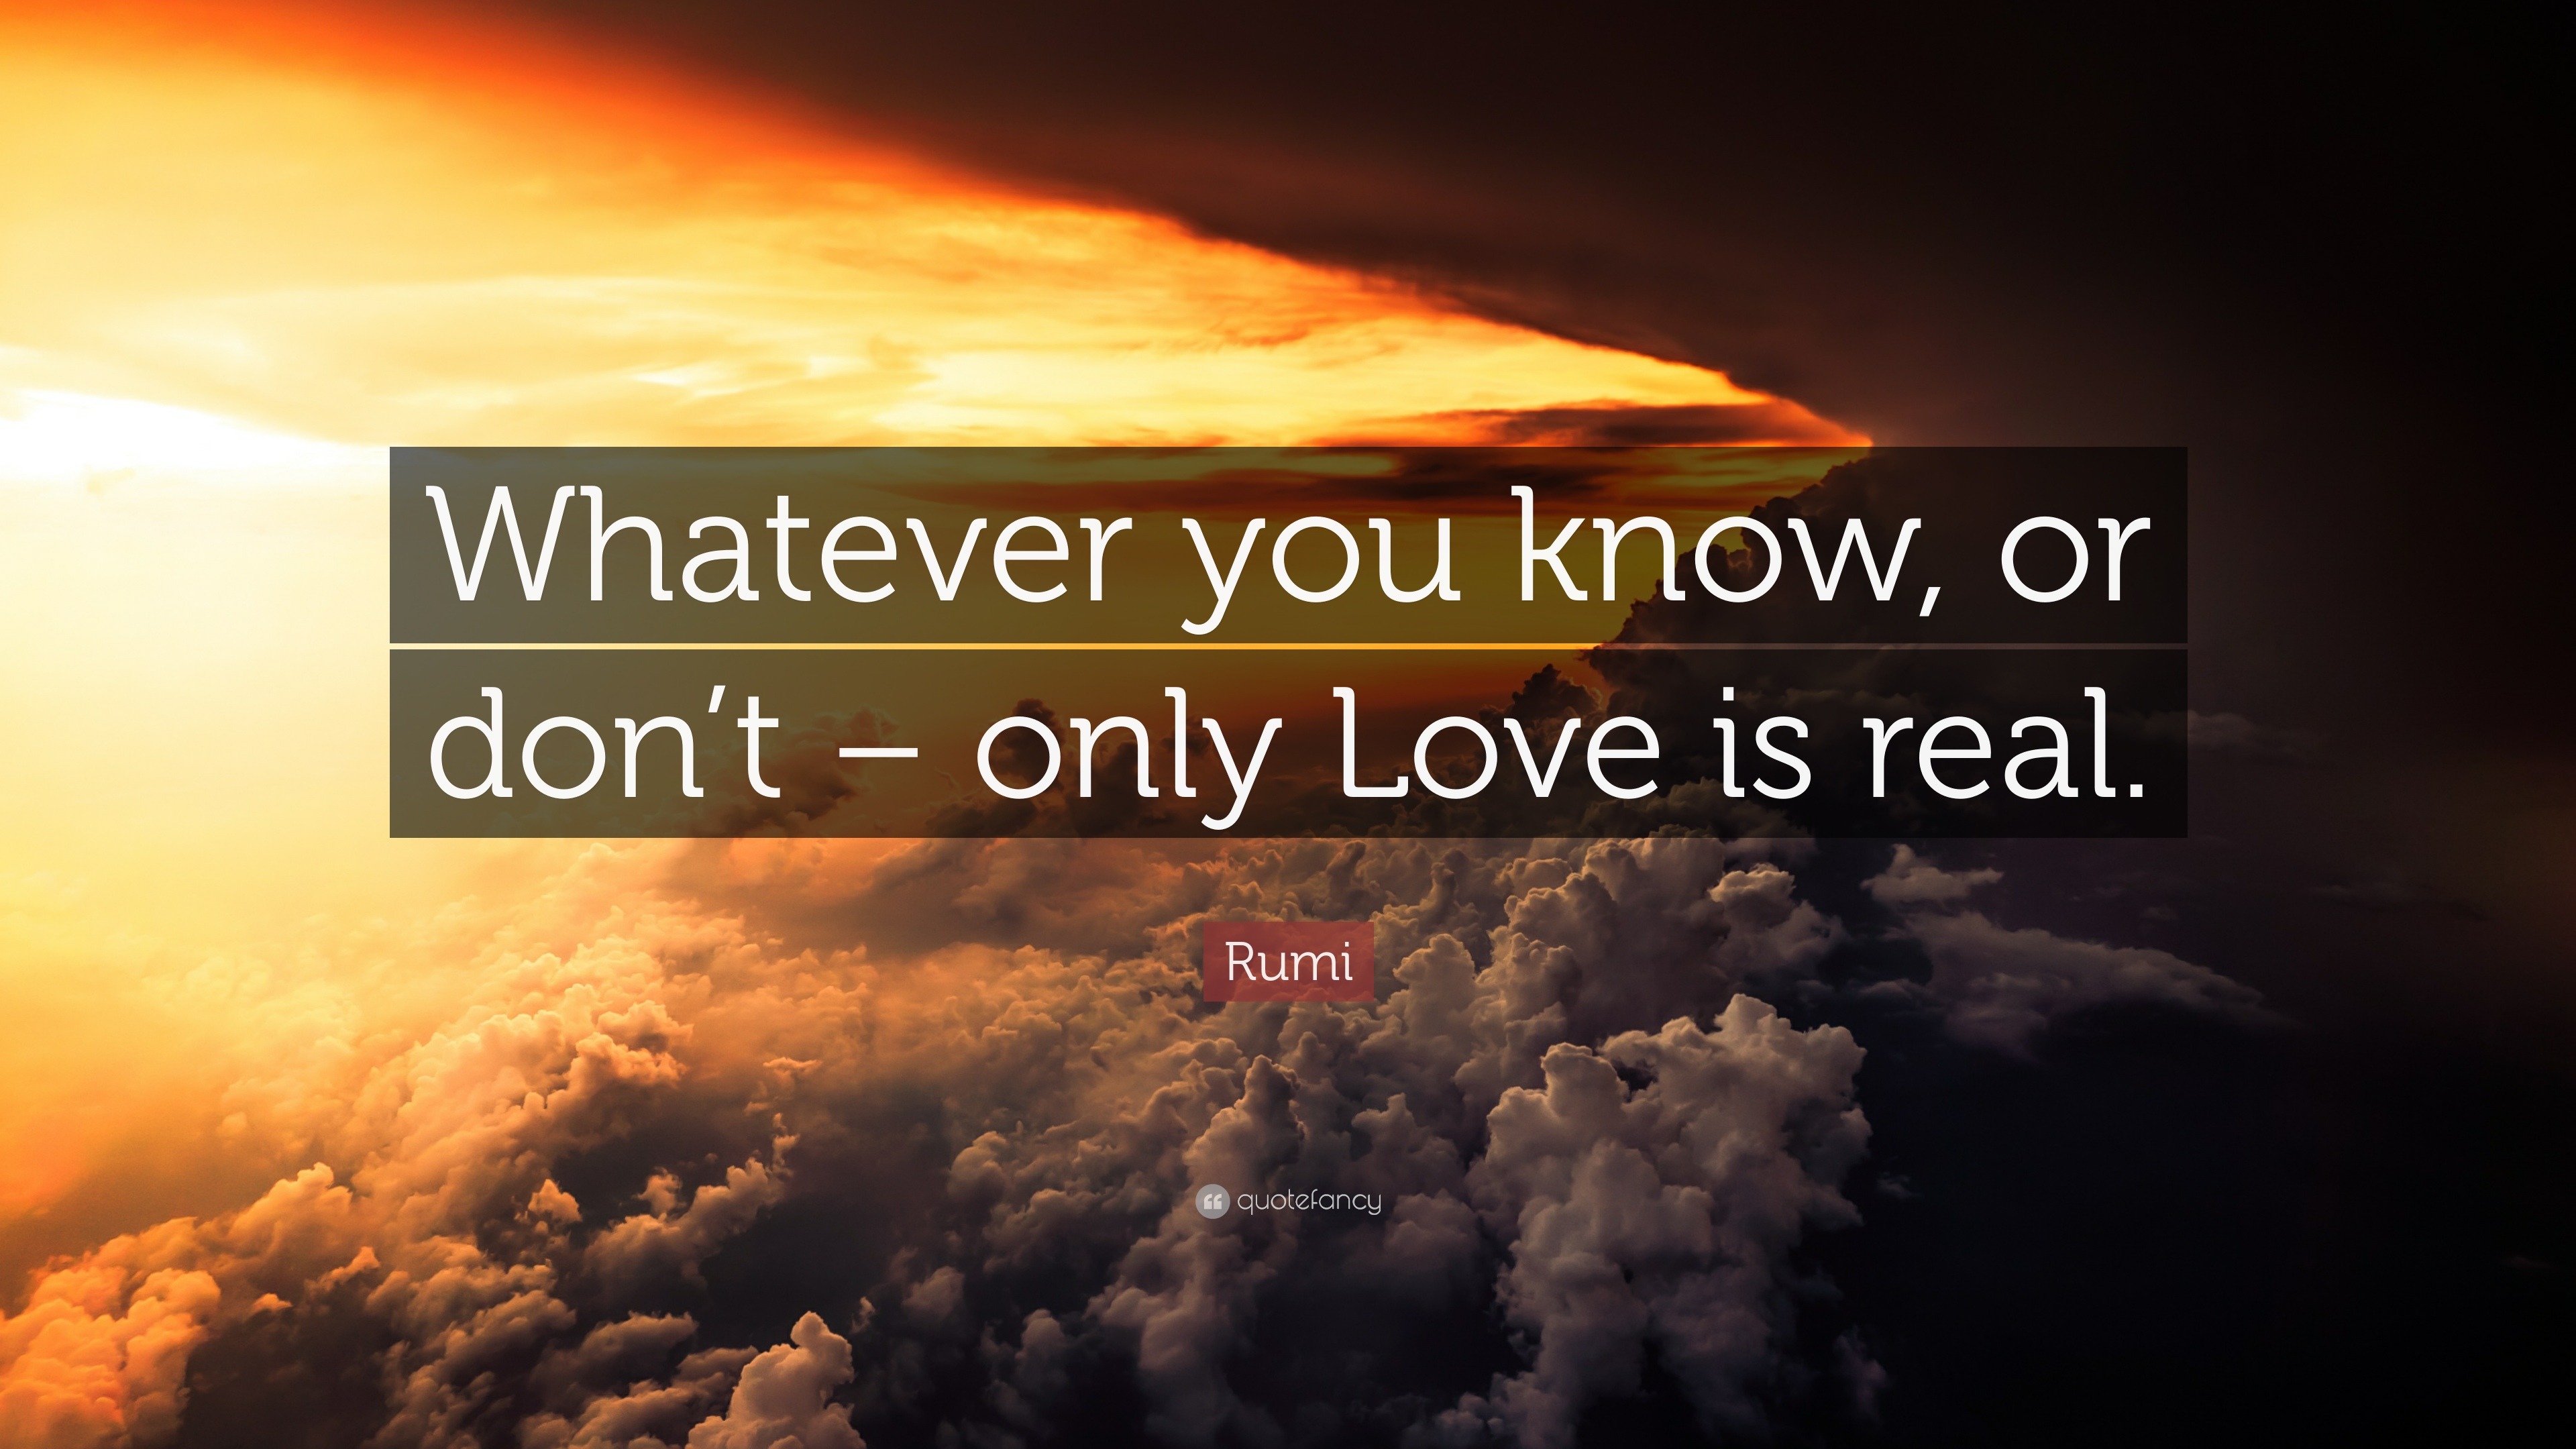 Rumi Quote: “Whatever you know, or don't – only Love is real.”